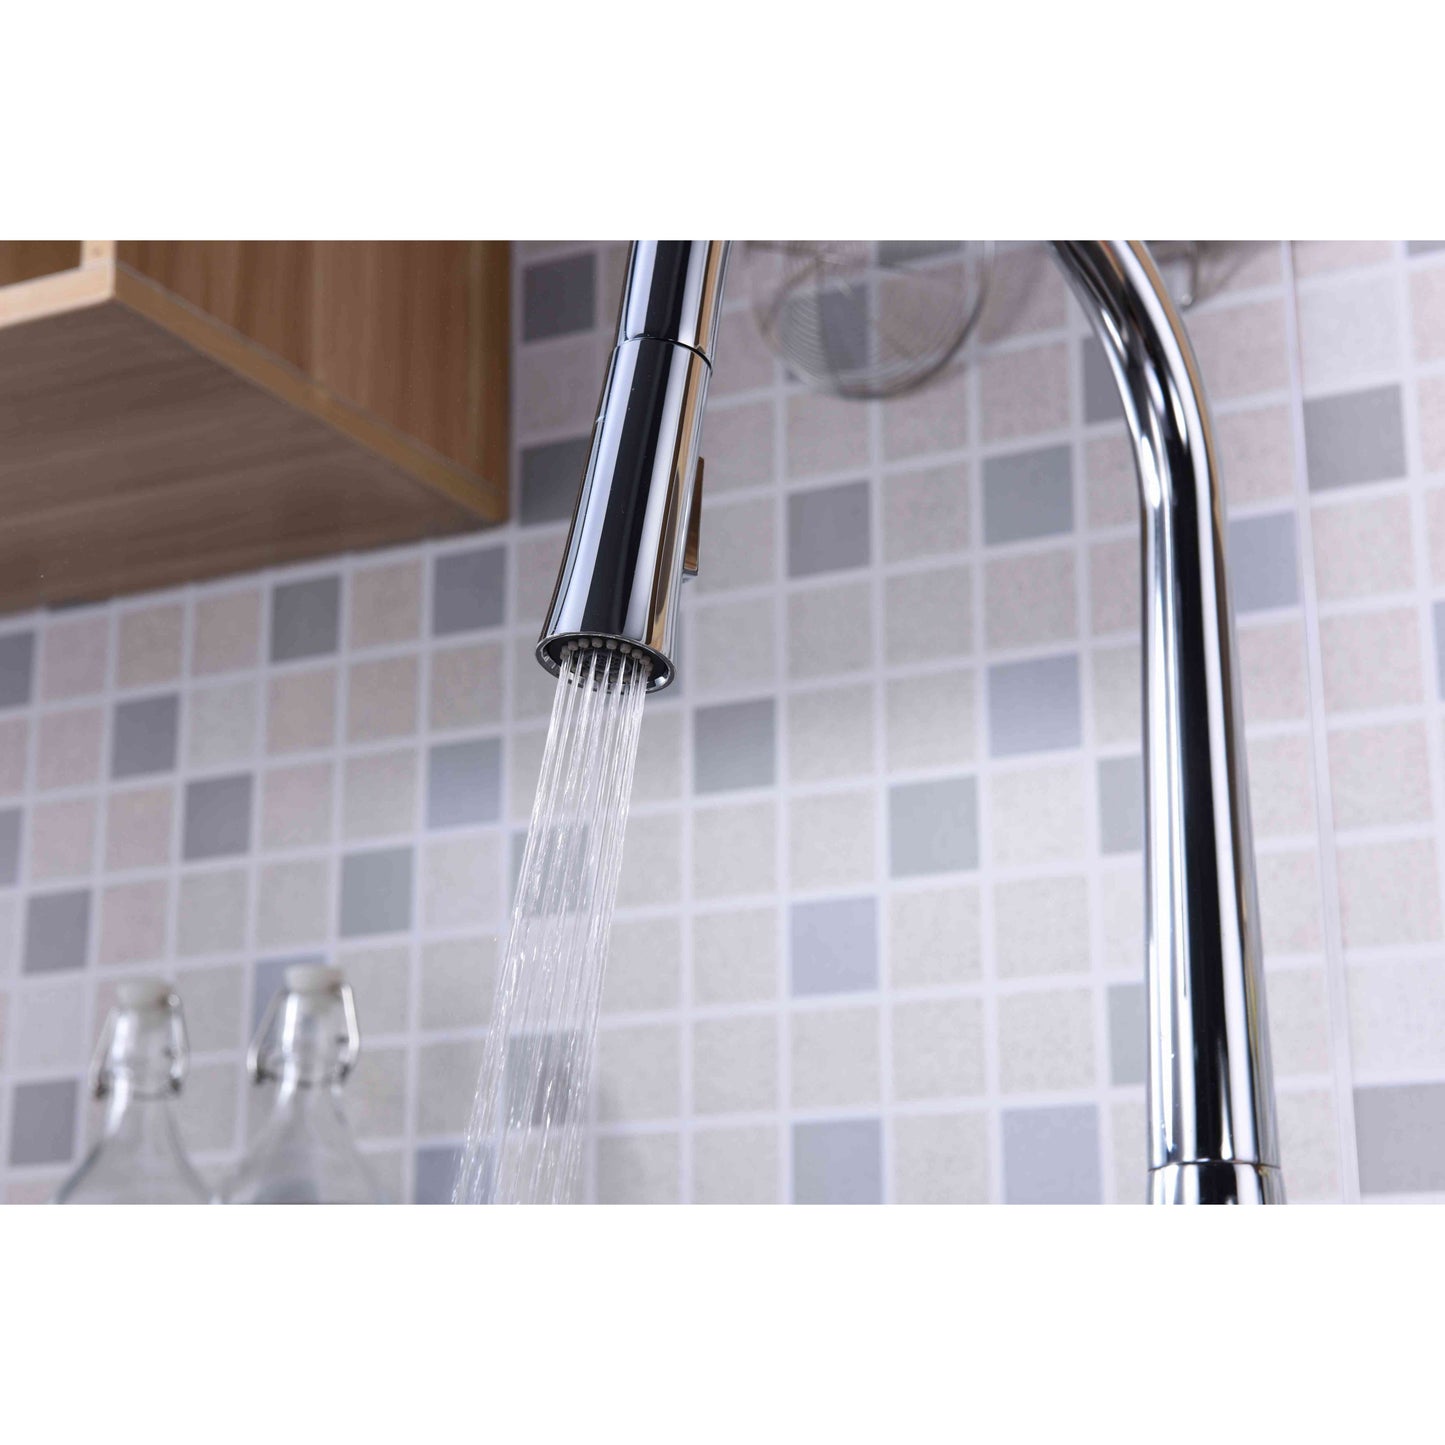 ANZZI Orbital Series Single Hole Polished Chrome Kitchen Faucet With Euro-Grip Pull Down Sprayer